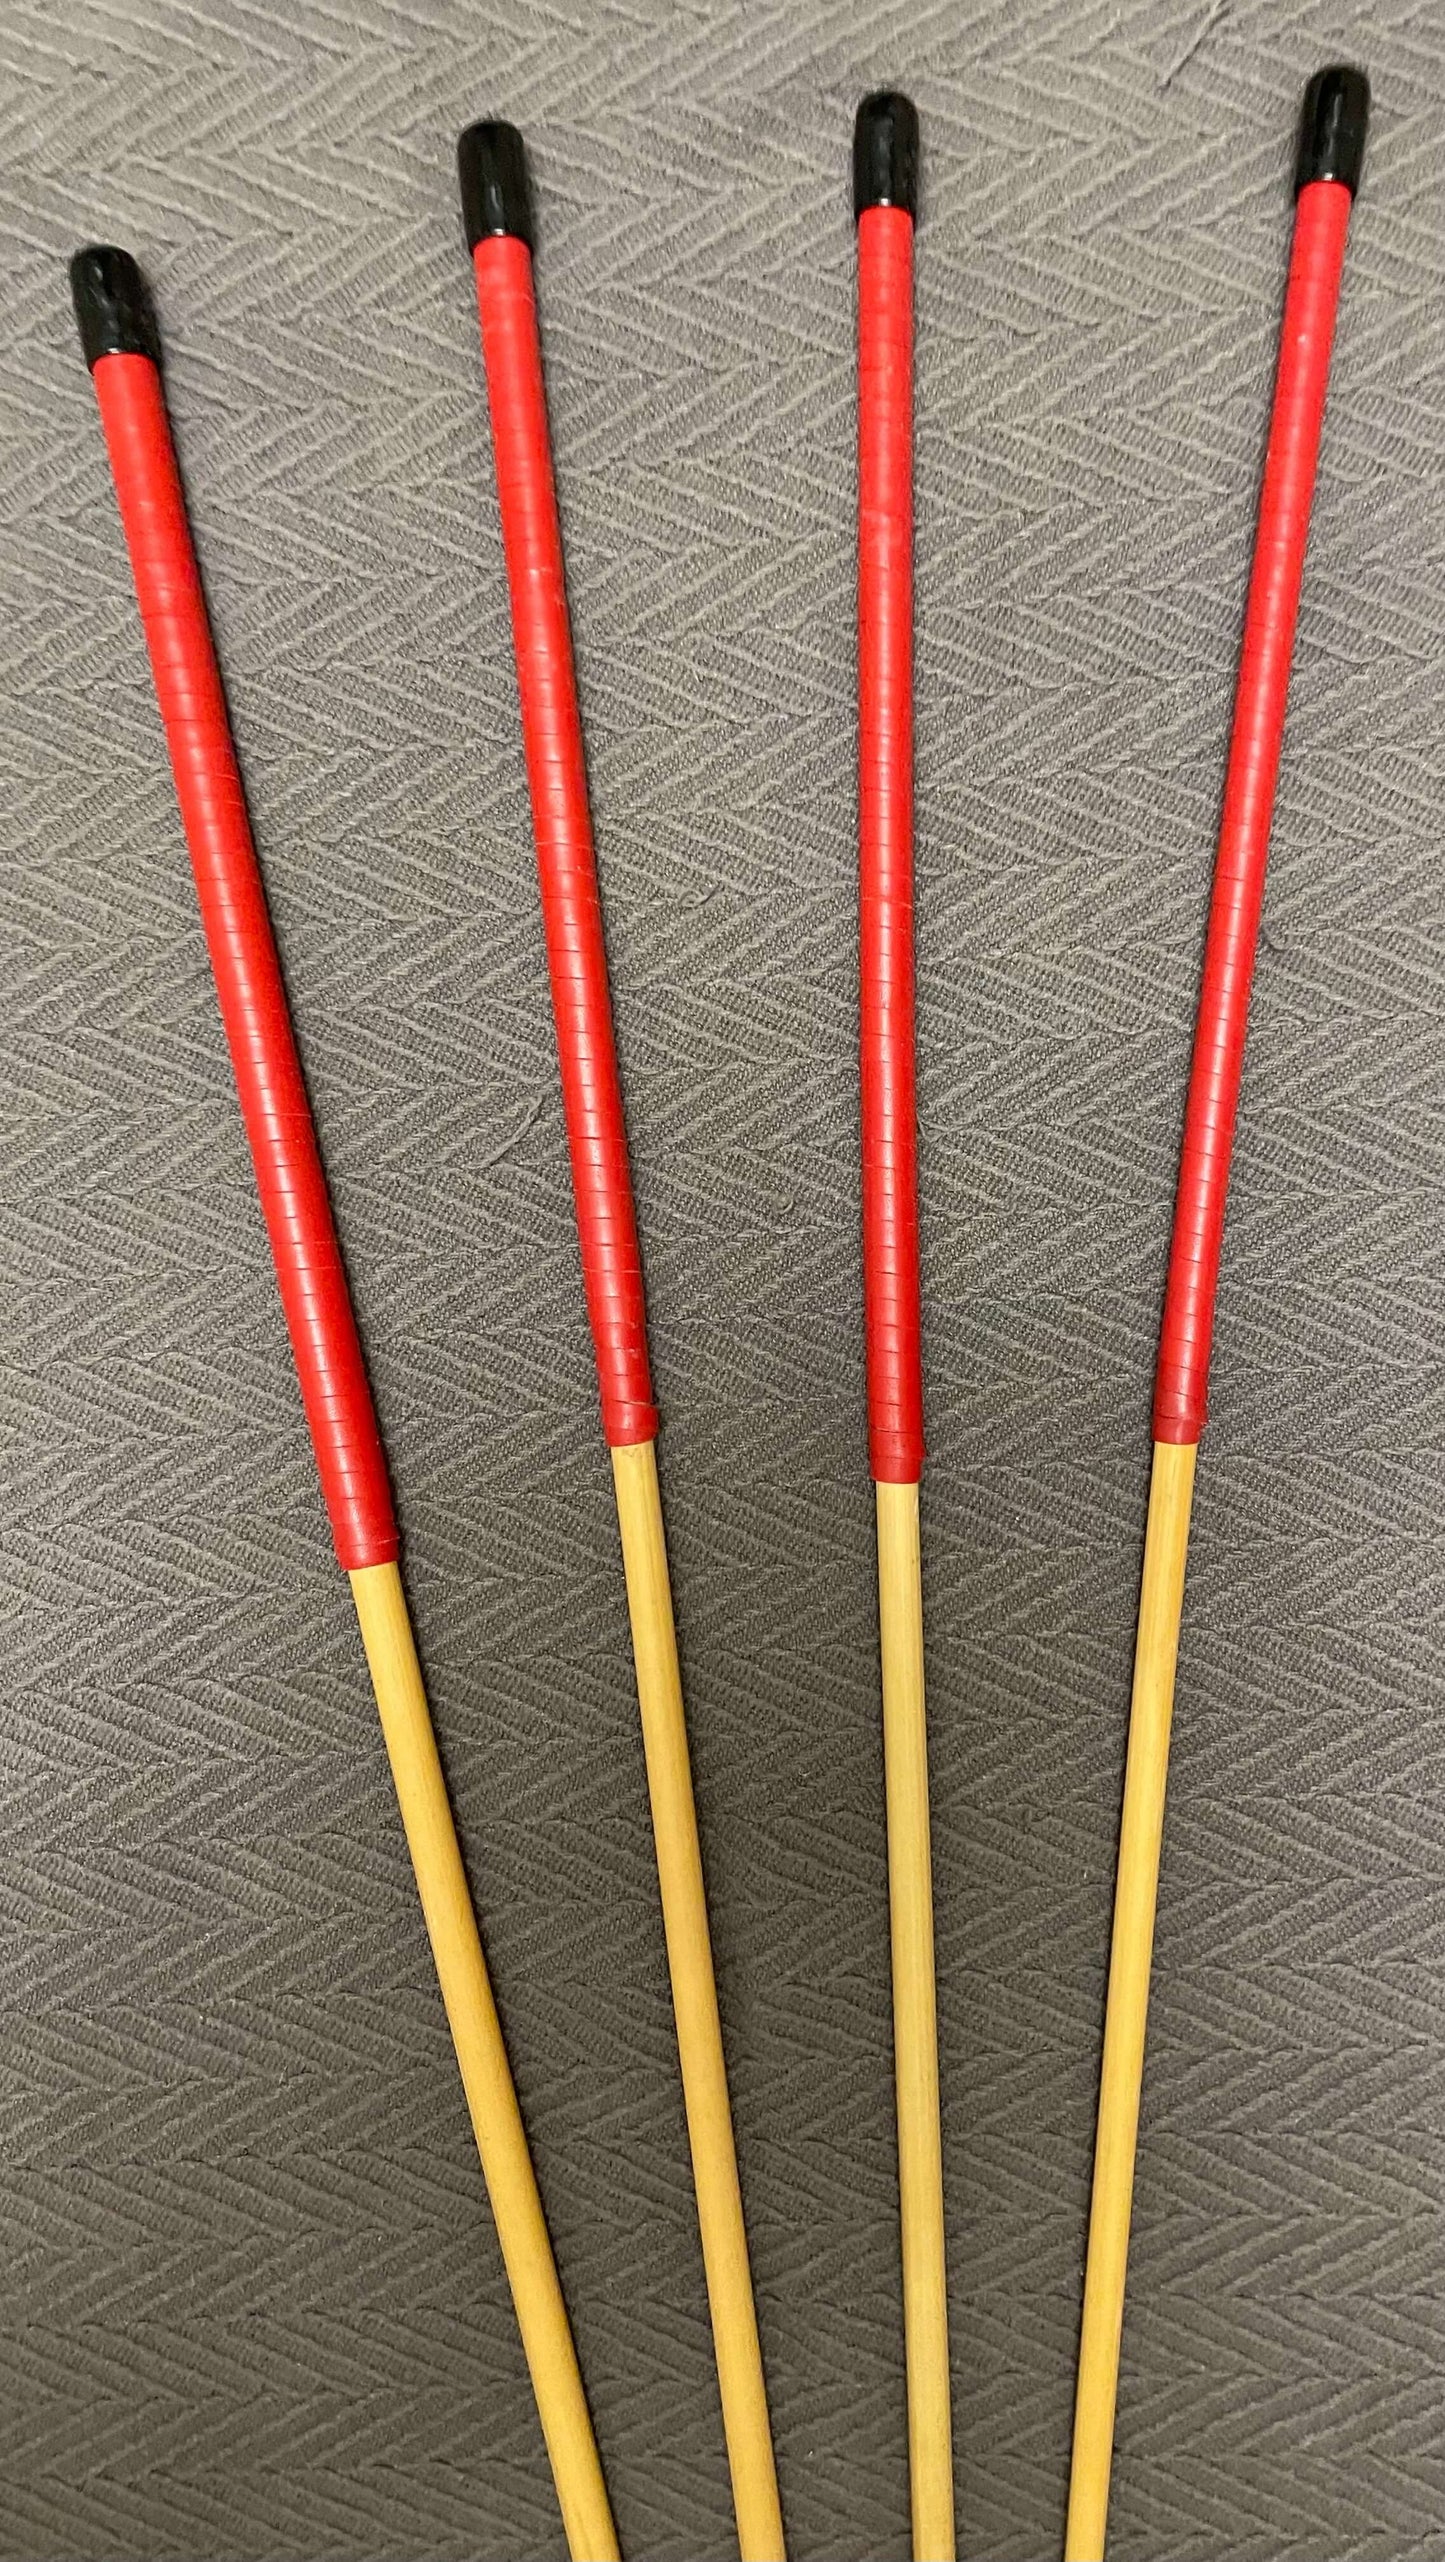 Dragon Cane Professional Set of 4 Classic Dragon Canes  - 90 cms L & 8-8.5/9-9.5/10-10.5/11-11.5 mm D - 12" BRANDY or RED Kangaroo Leather Handles